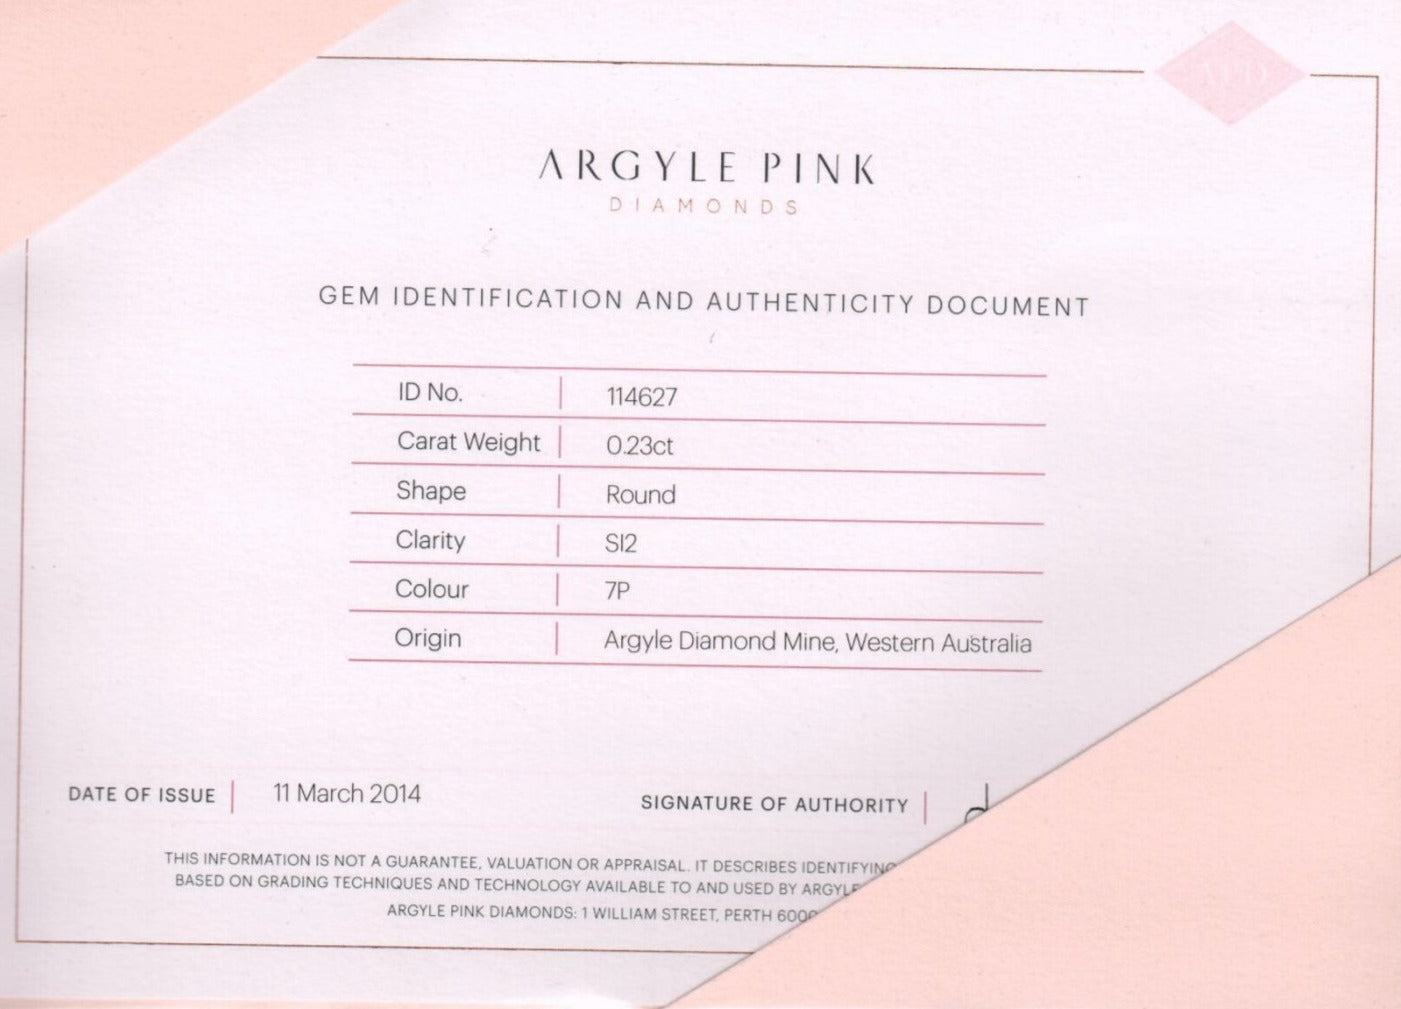 Certificate of authenticity for Argyle Pink Diamonds, issued 2014.